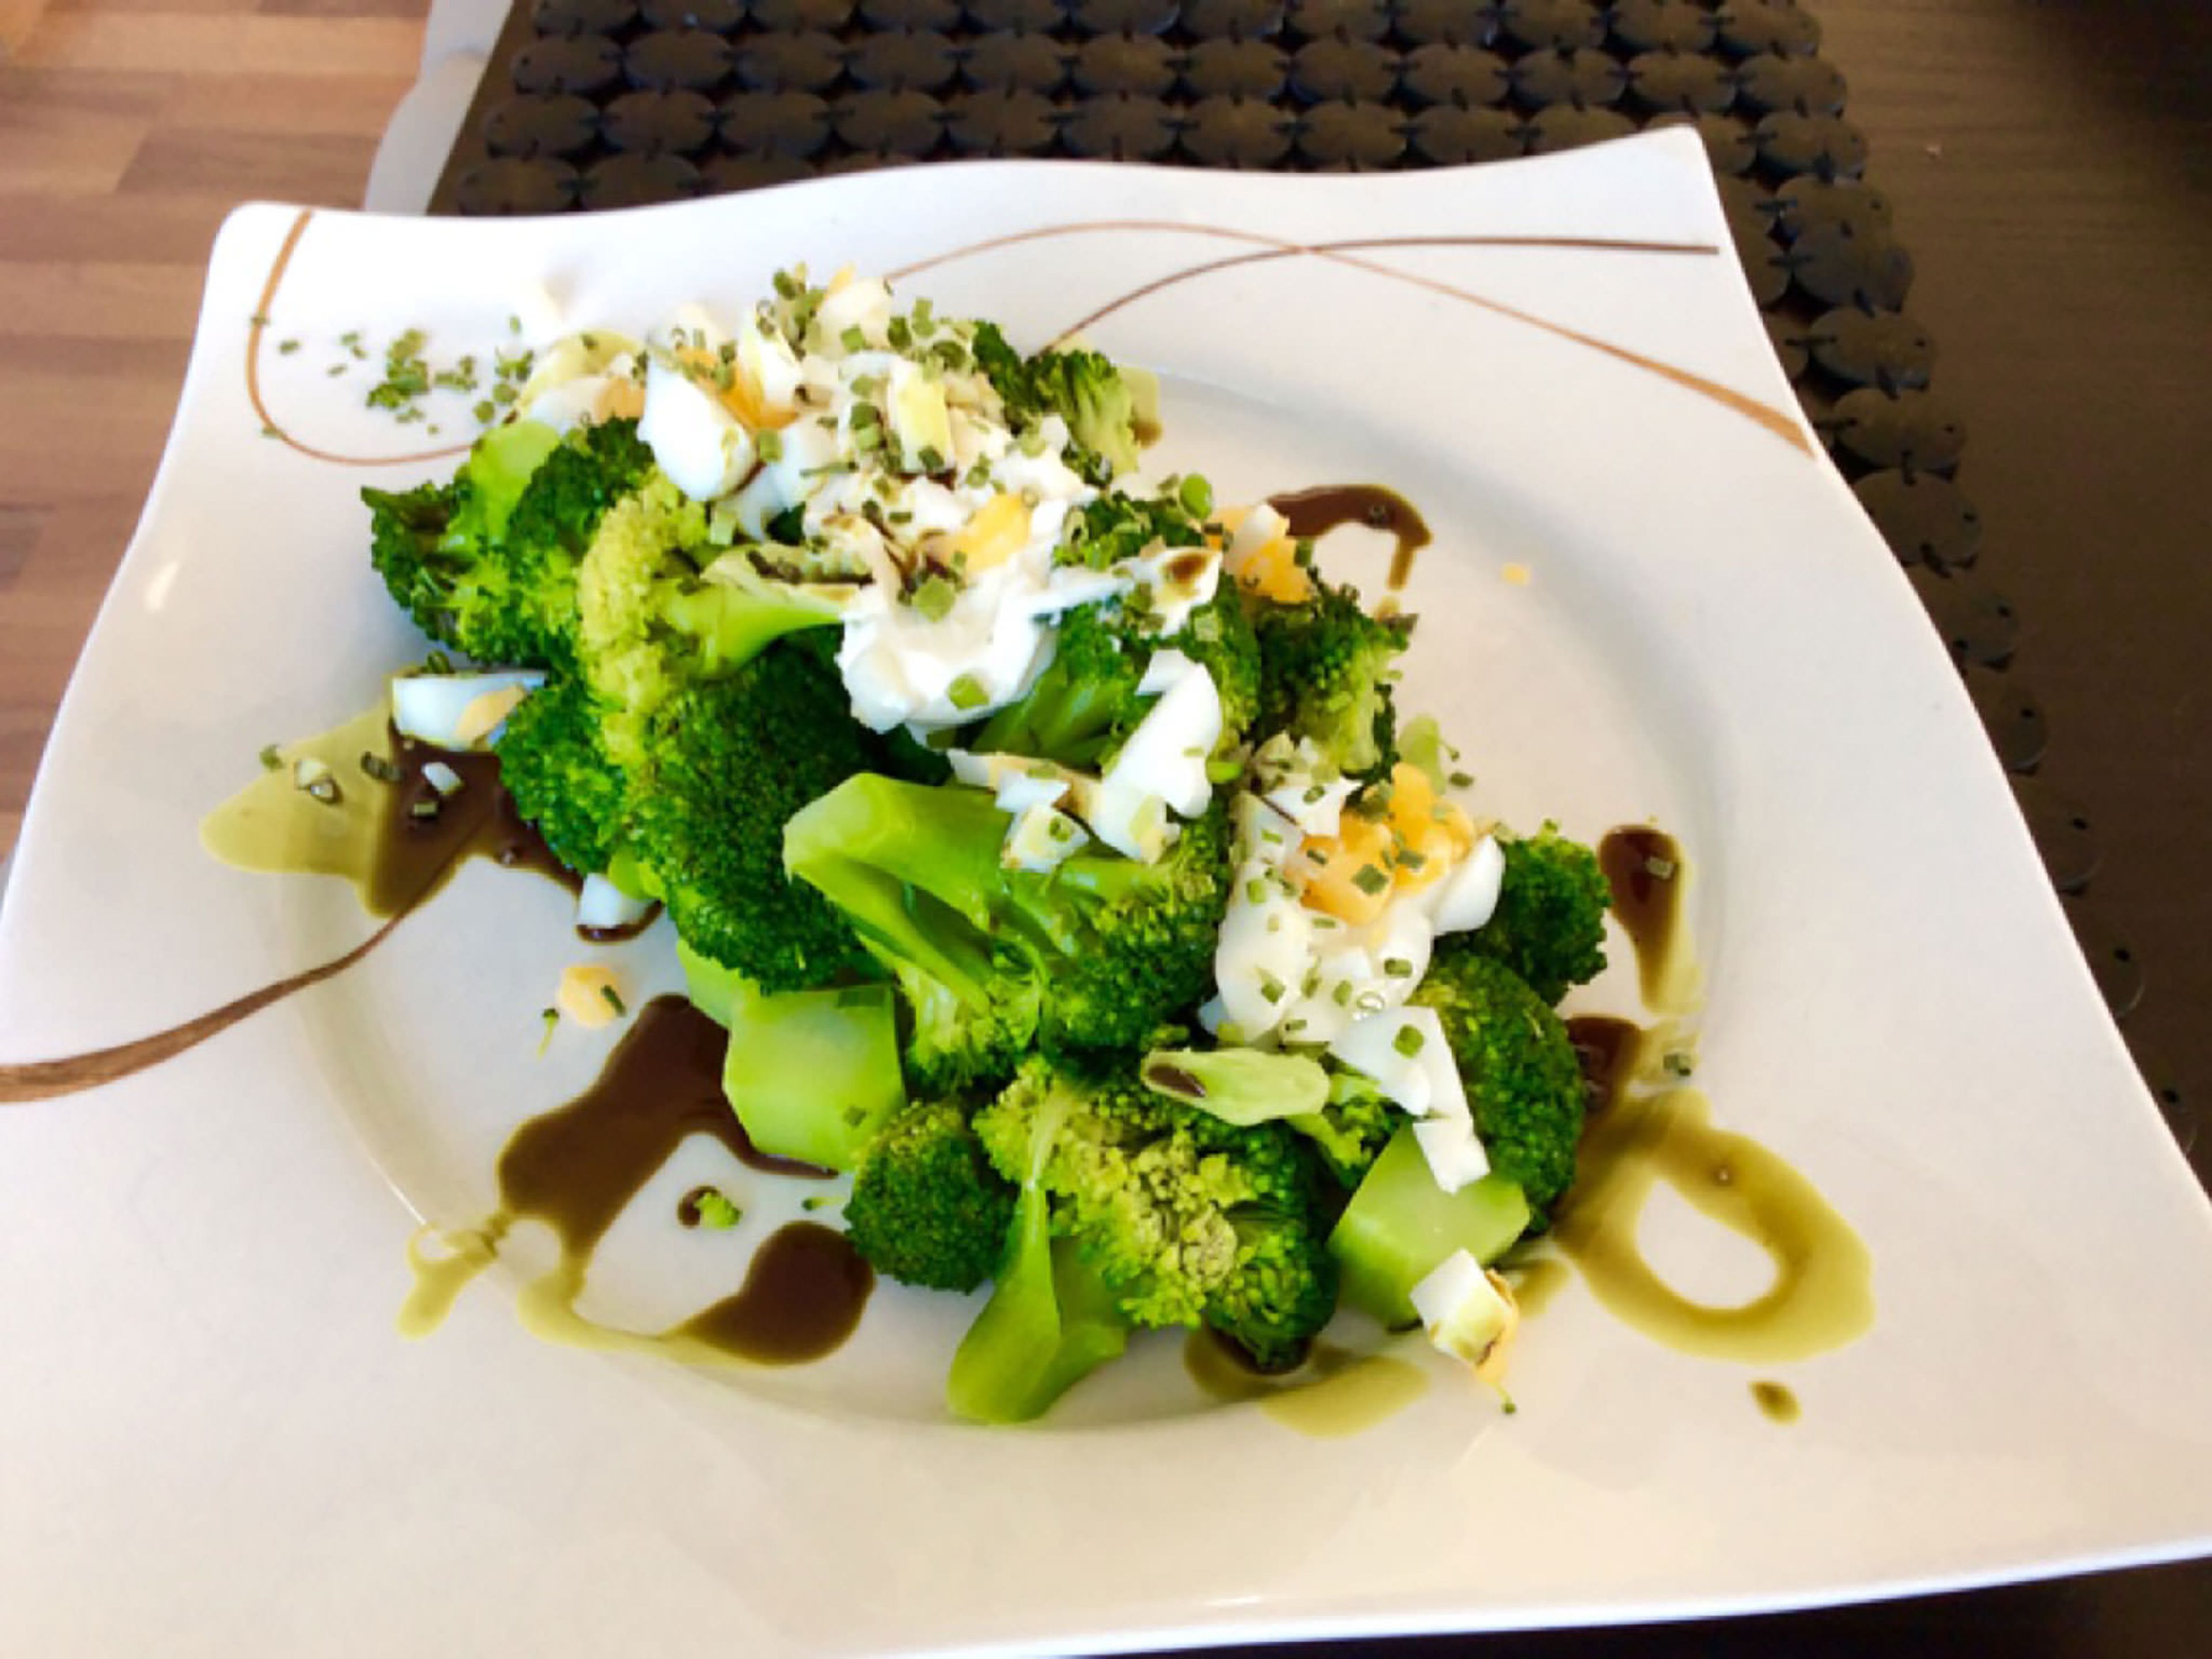 Place broccoli on a plate, add crème fraîche mixture, and crumble egg on top. Serve with pumpkin seed oil, salt, and pepper.